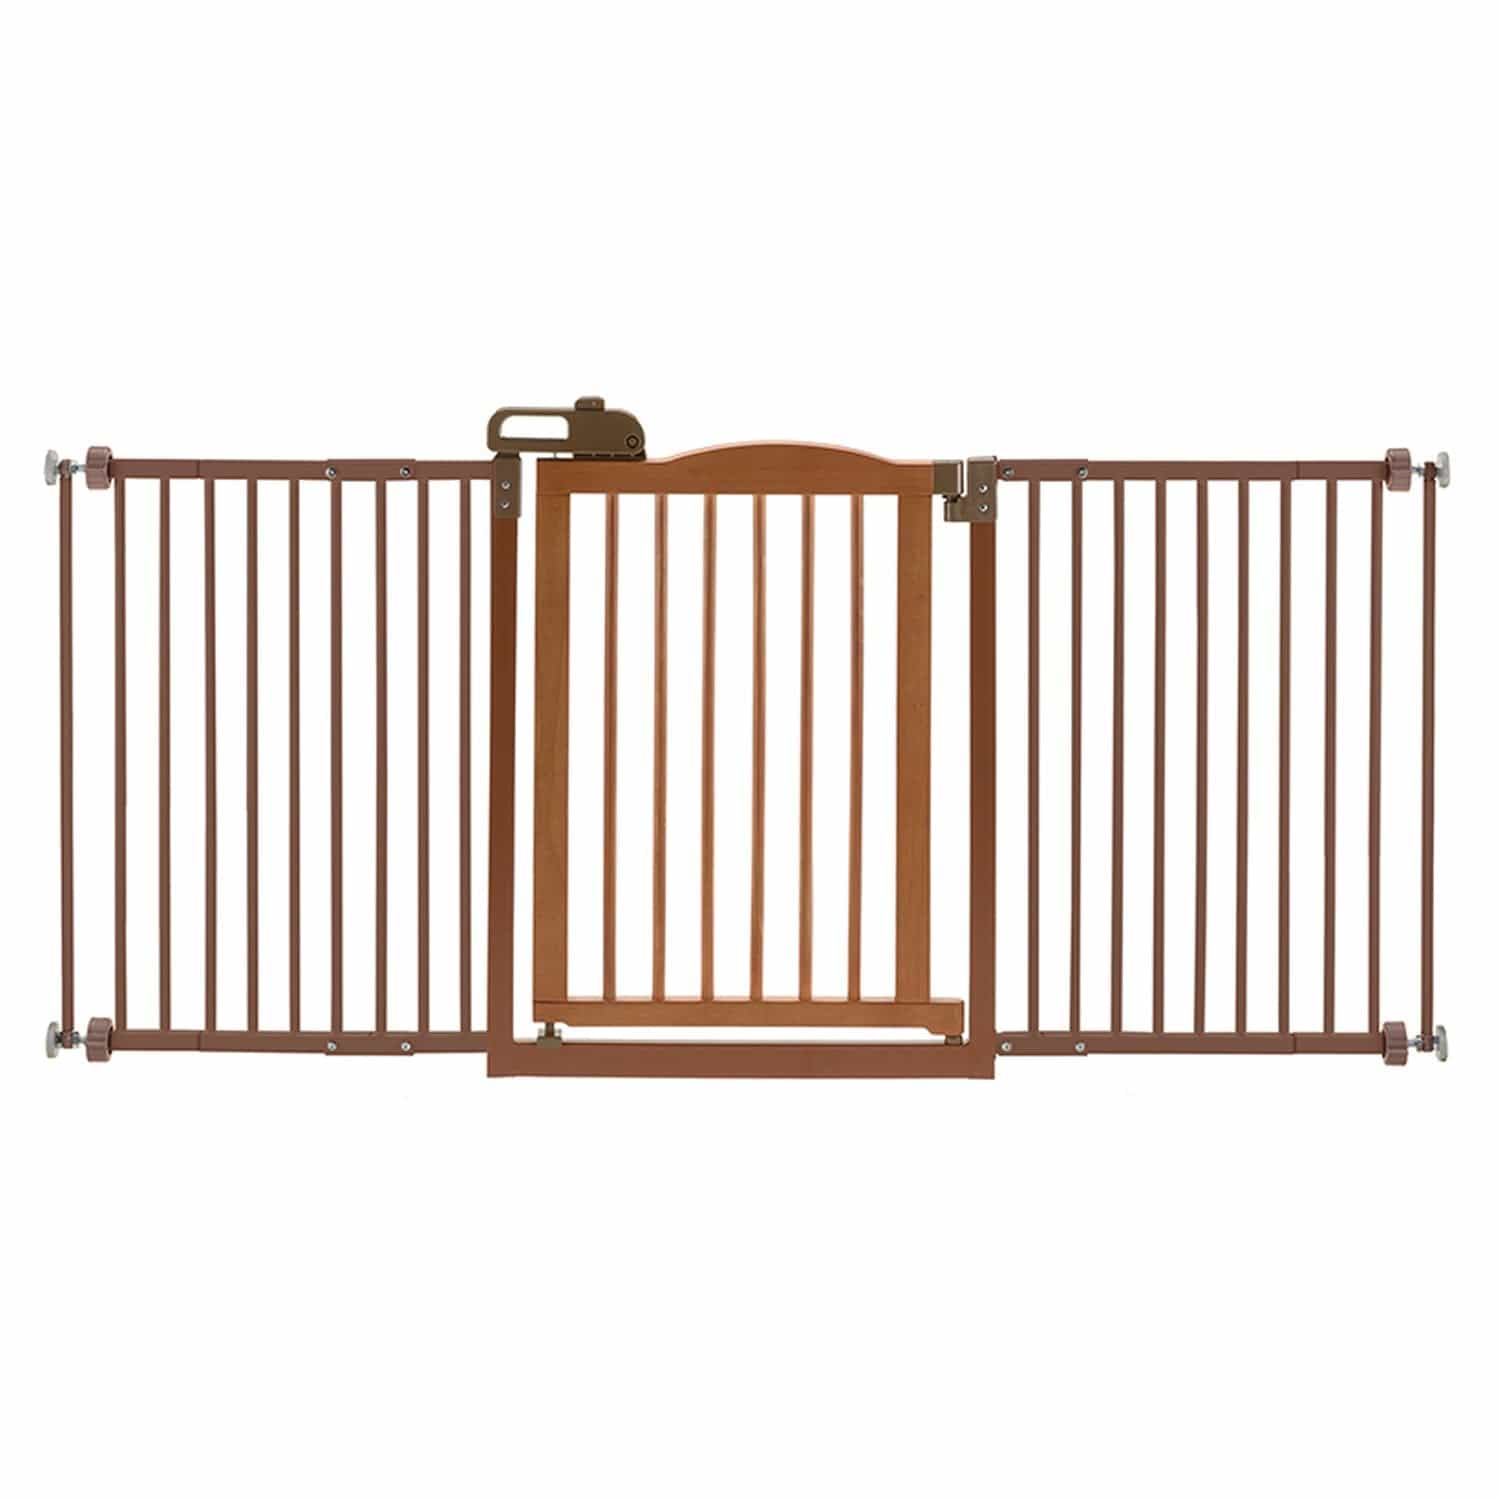 Richell One-touch Wide Pressure Mounted Pet Gate Ii Brown 32.1" - 62.8" X 2" X 3